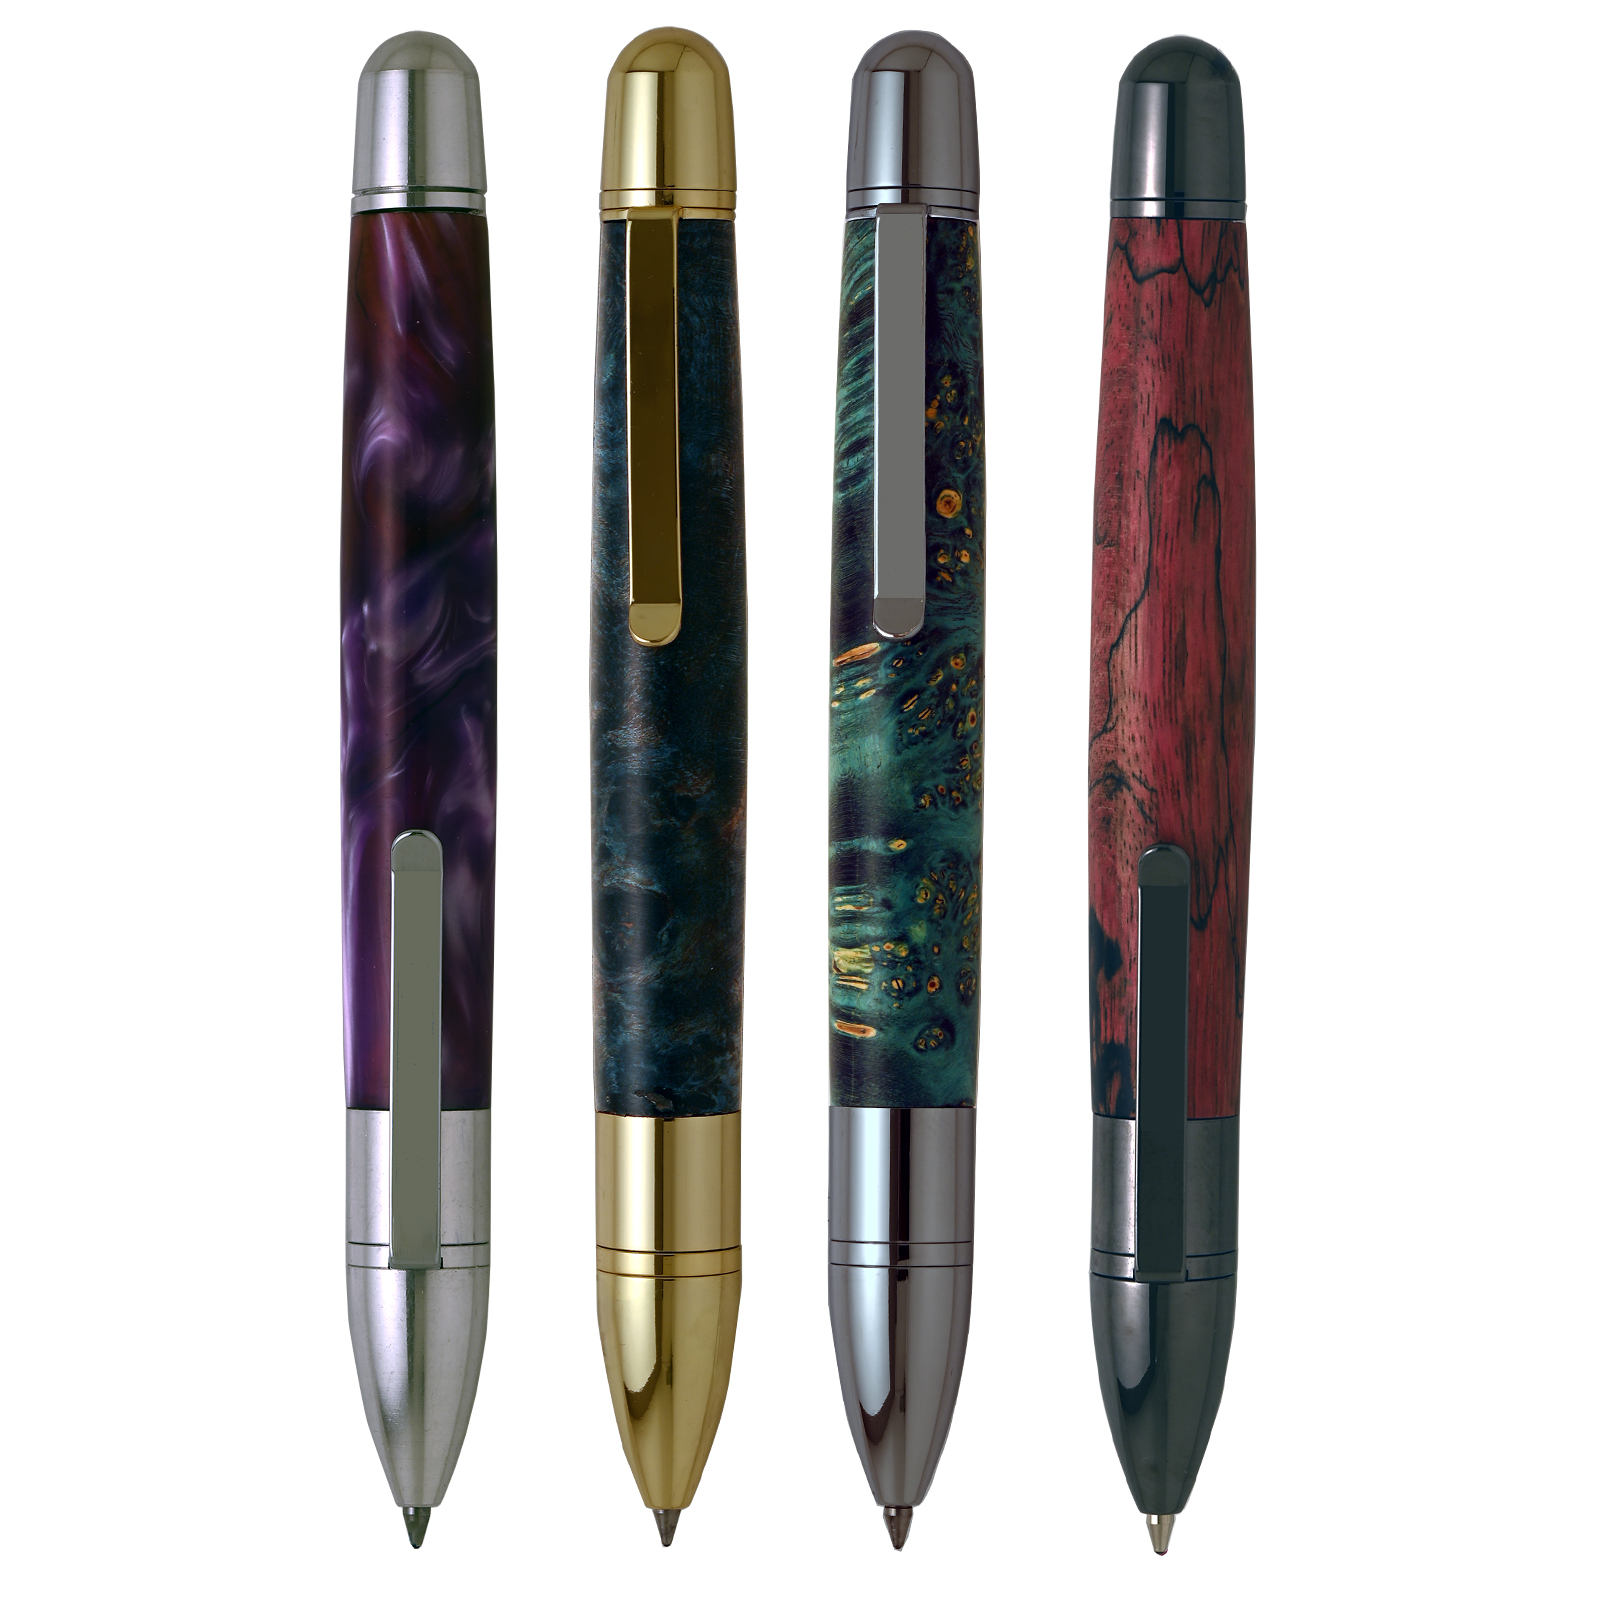 Penn State Industries PKVICAB Victorian Twist Ballpoint Pen Kit Woodturning  Project (5 pack in Antique Brass)